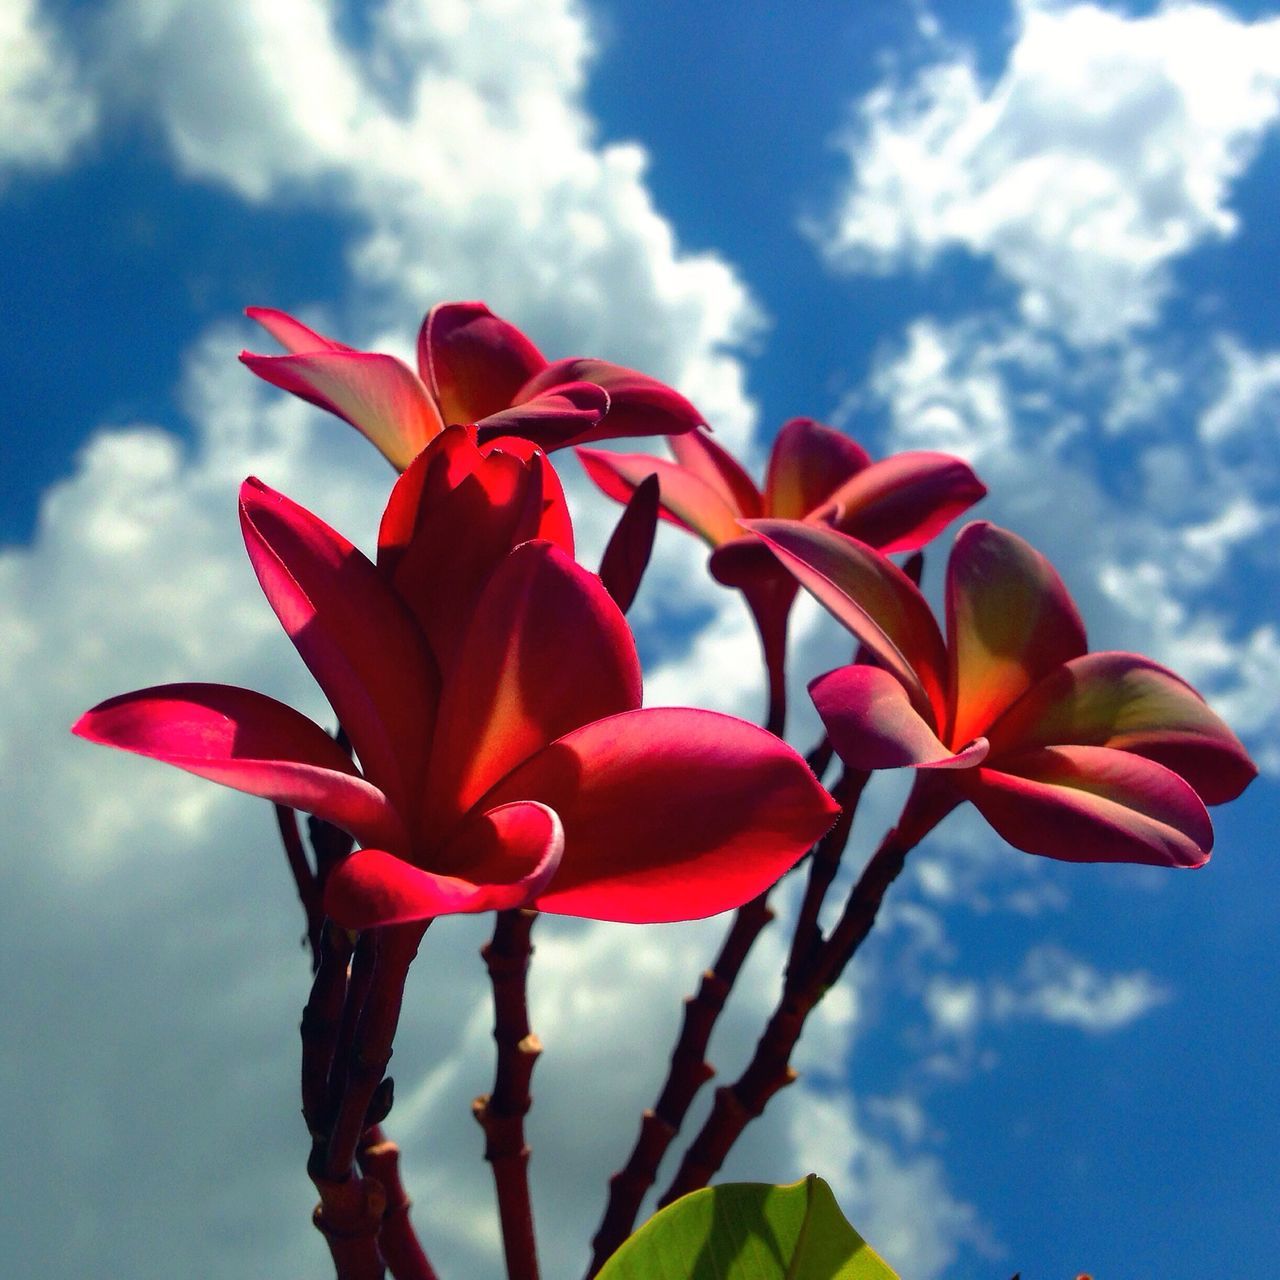 flower, sky, petal, freshness, fragility, growth, beauty in nature, red, flower head, cloud - sky, nature, low angle view, close-up, plant, cloud, blooming, focus on foreground, leaf, stem, bud